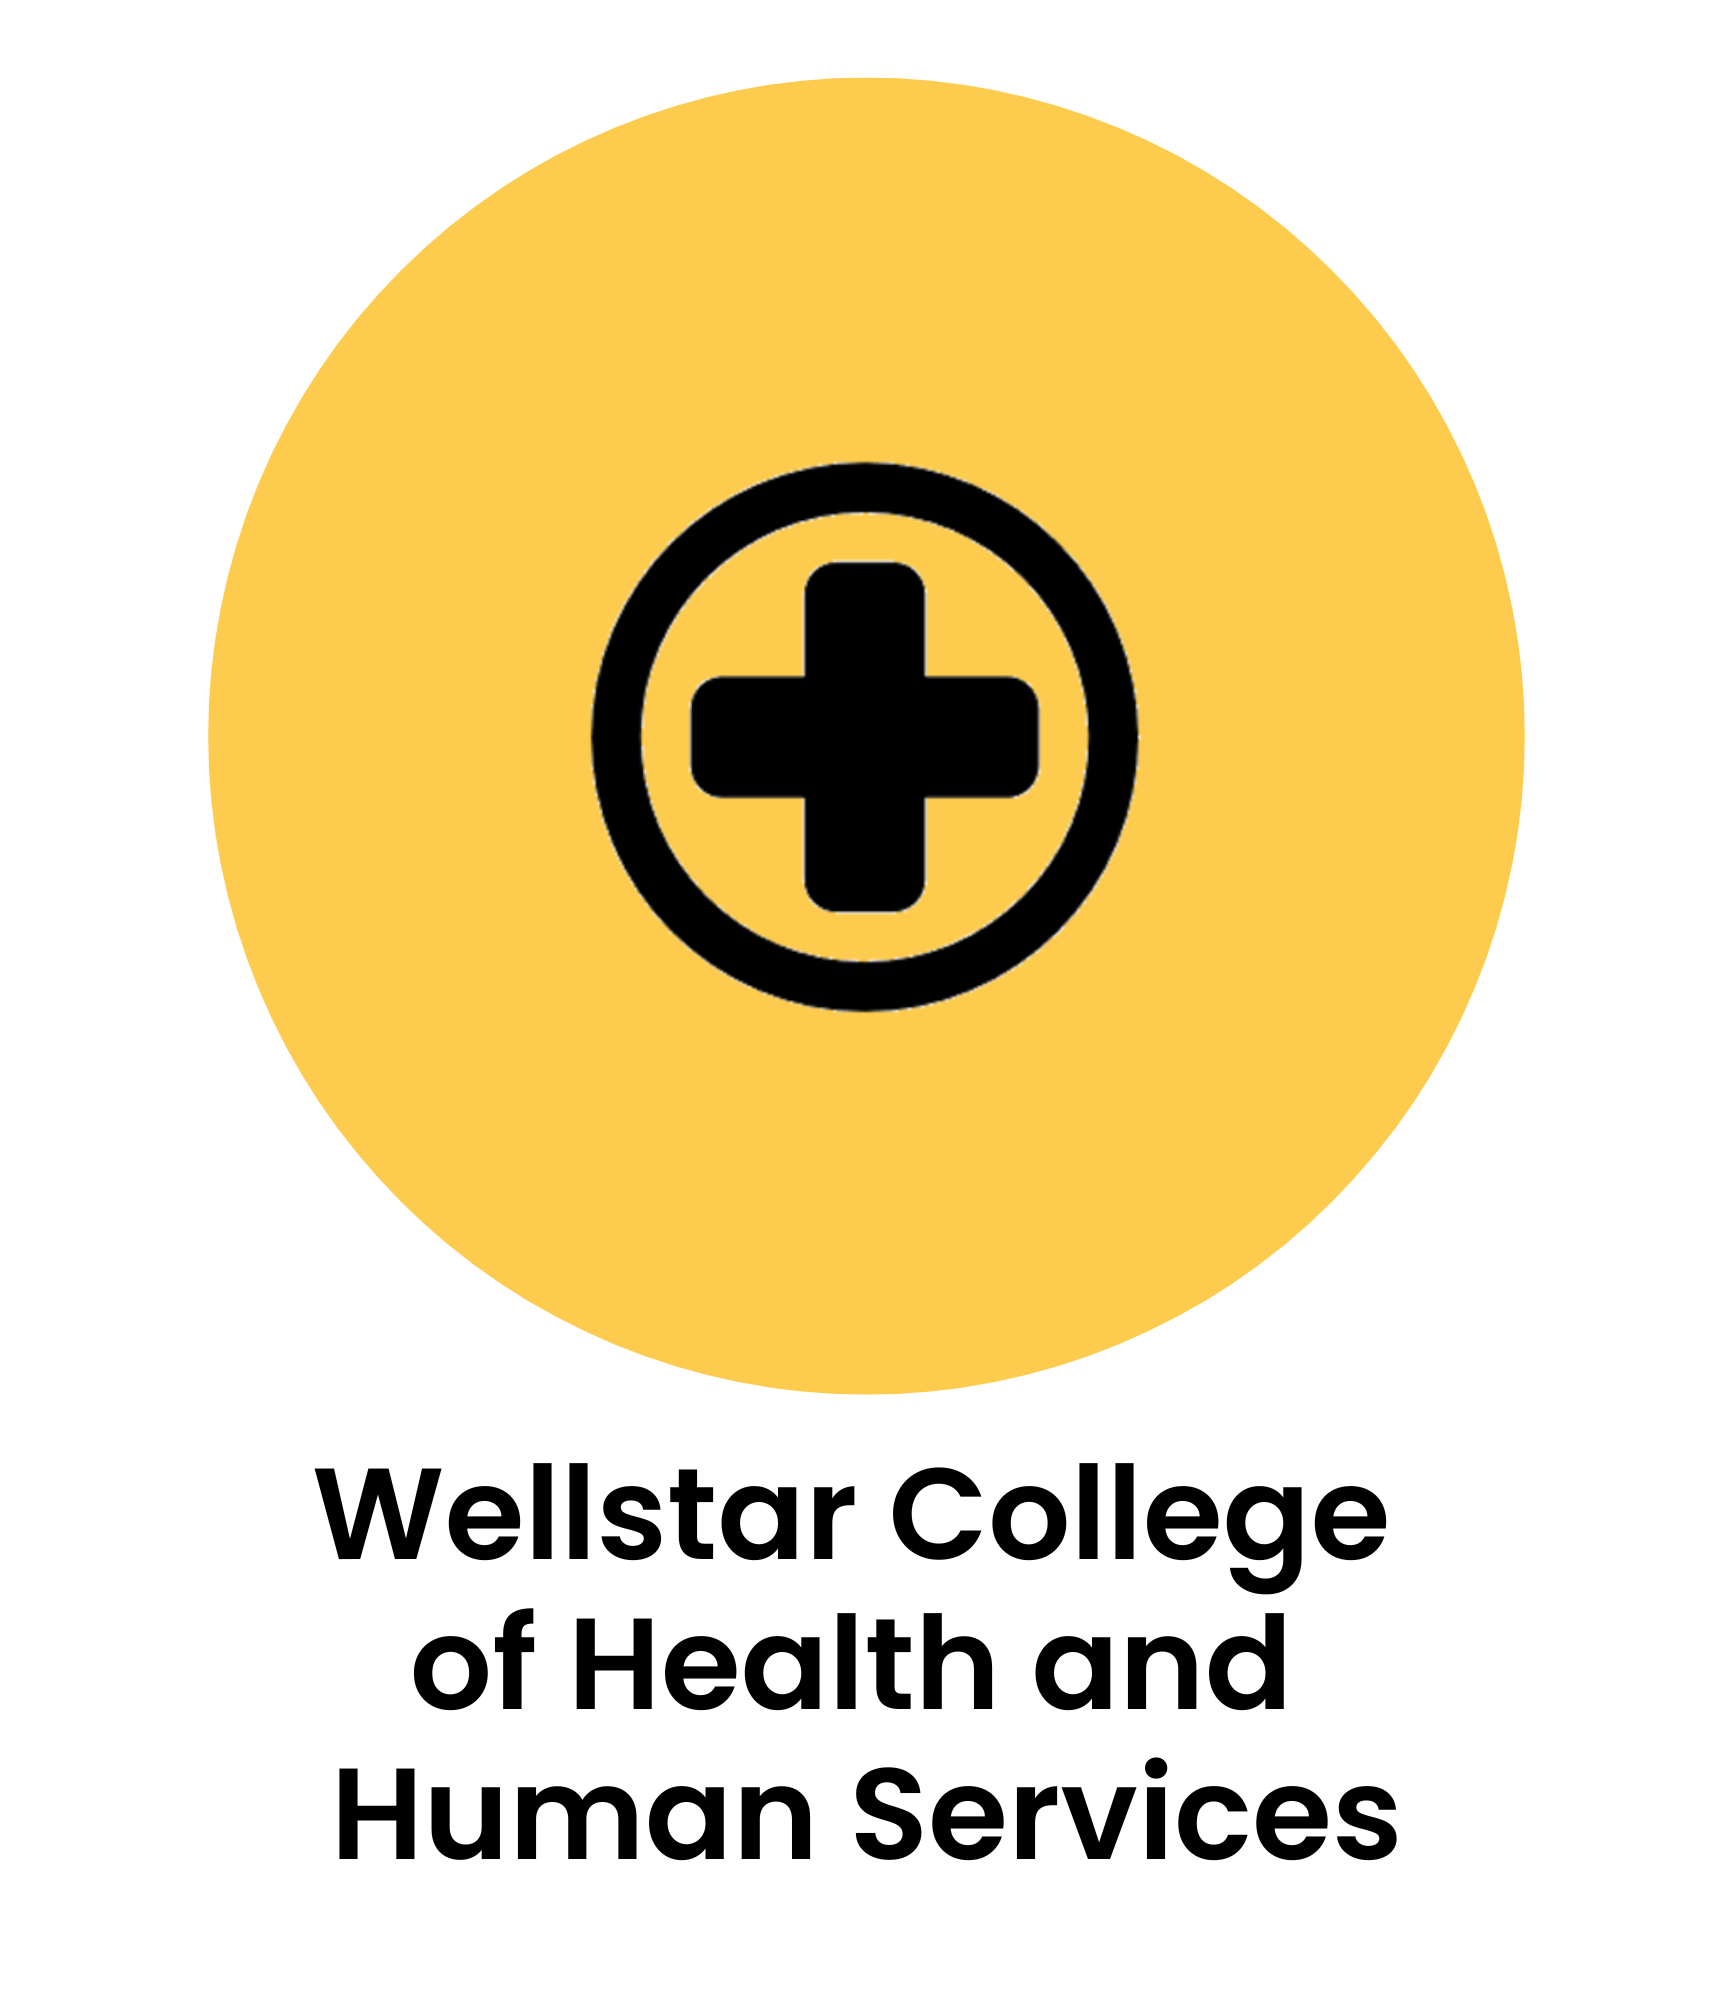 [text] Wellstar College of Health and Human Services